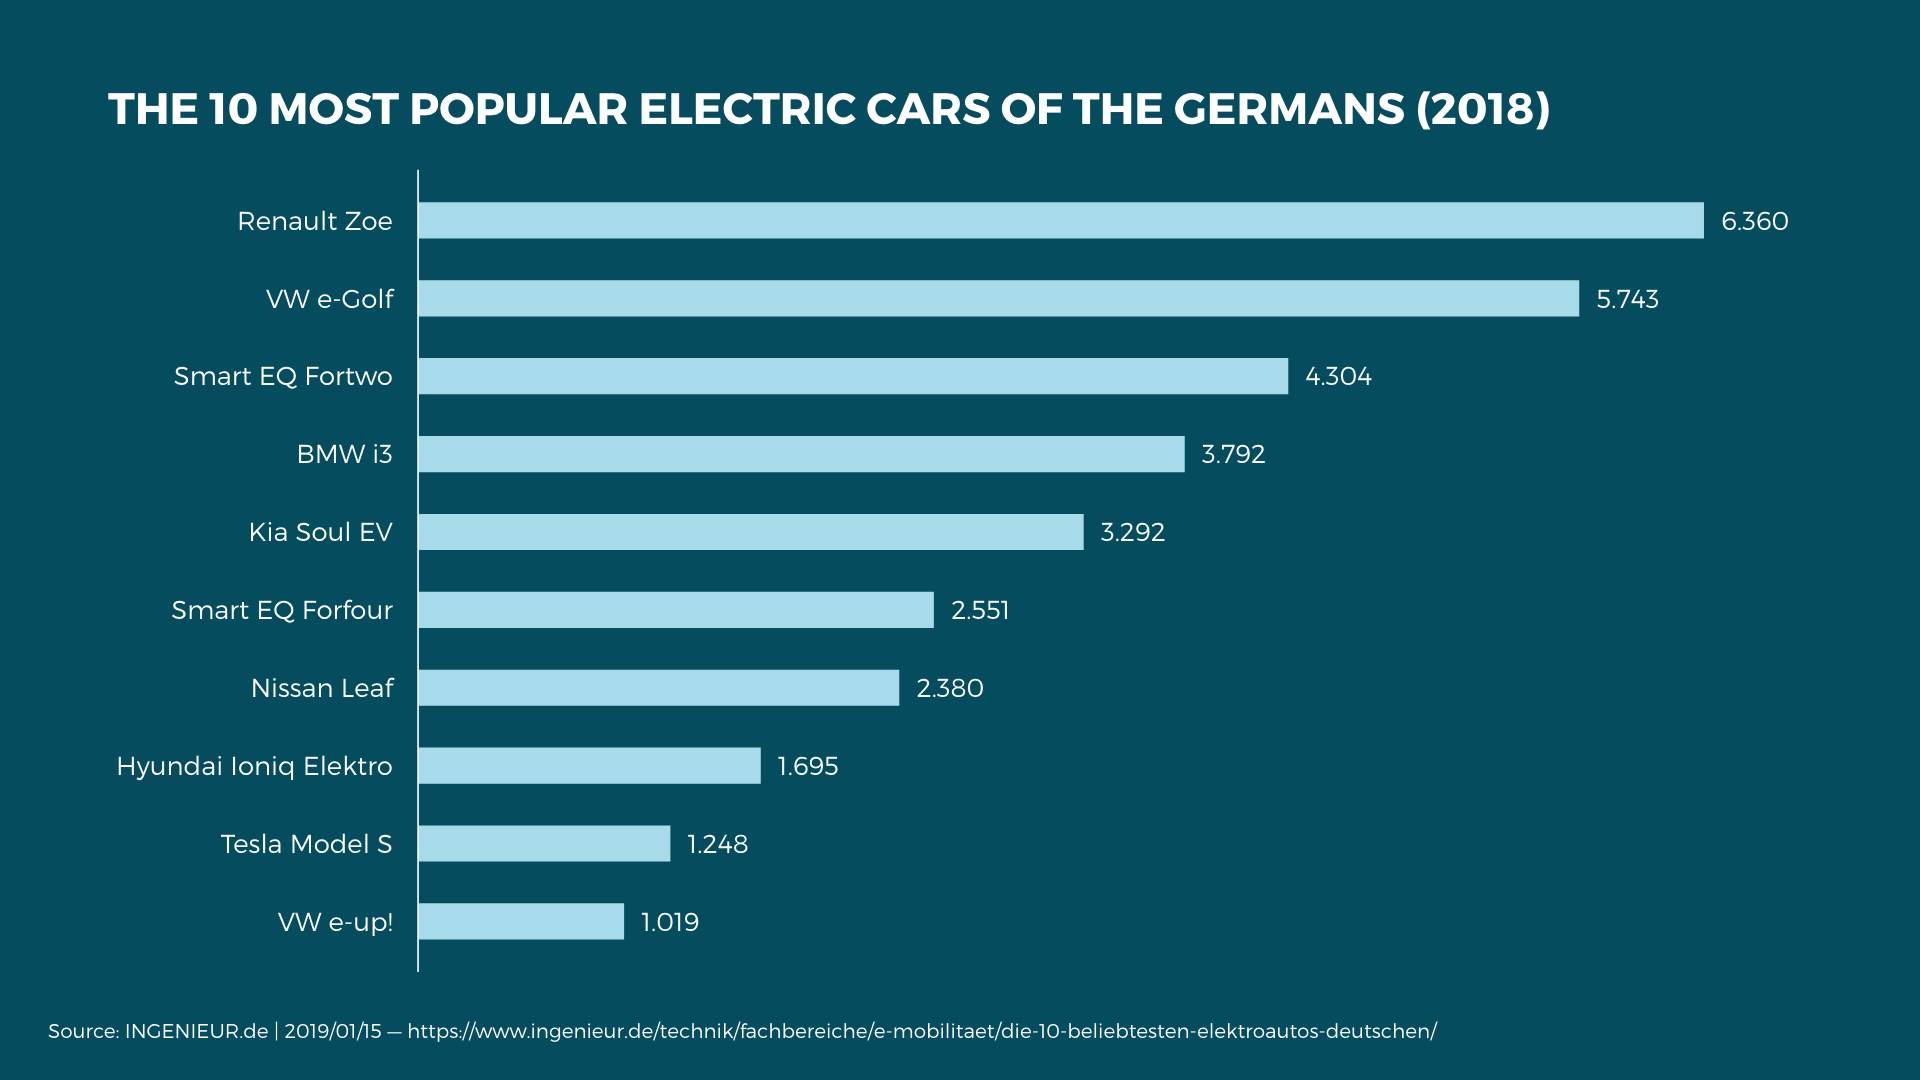 This bar chart shows the ten best-selling electric cars in Germany